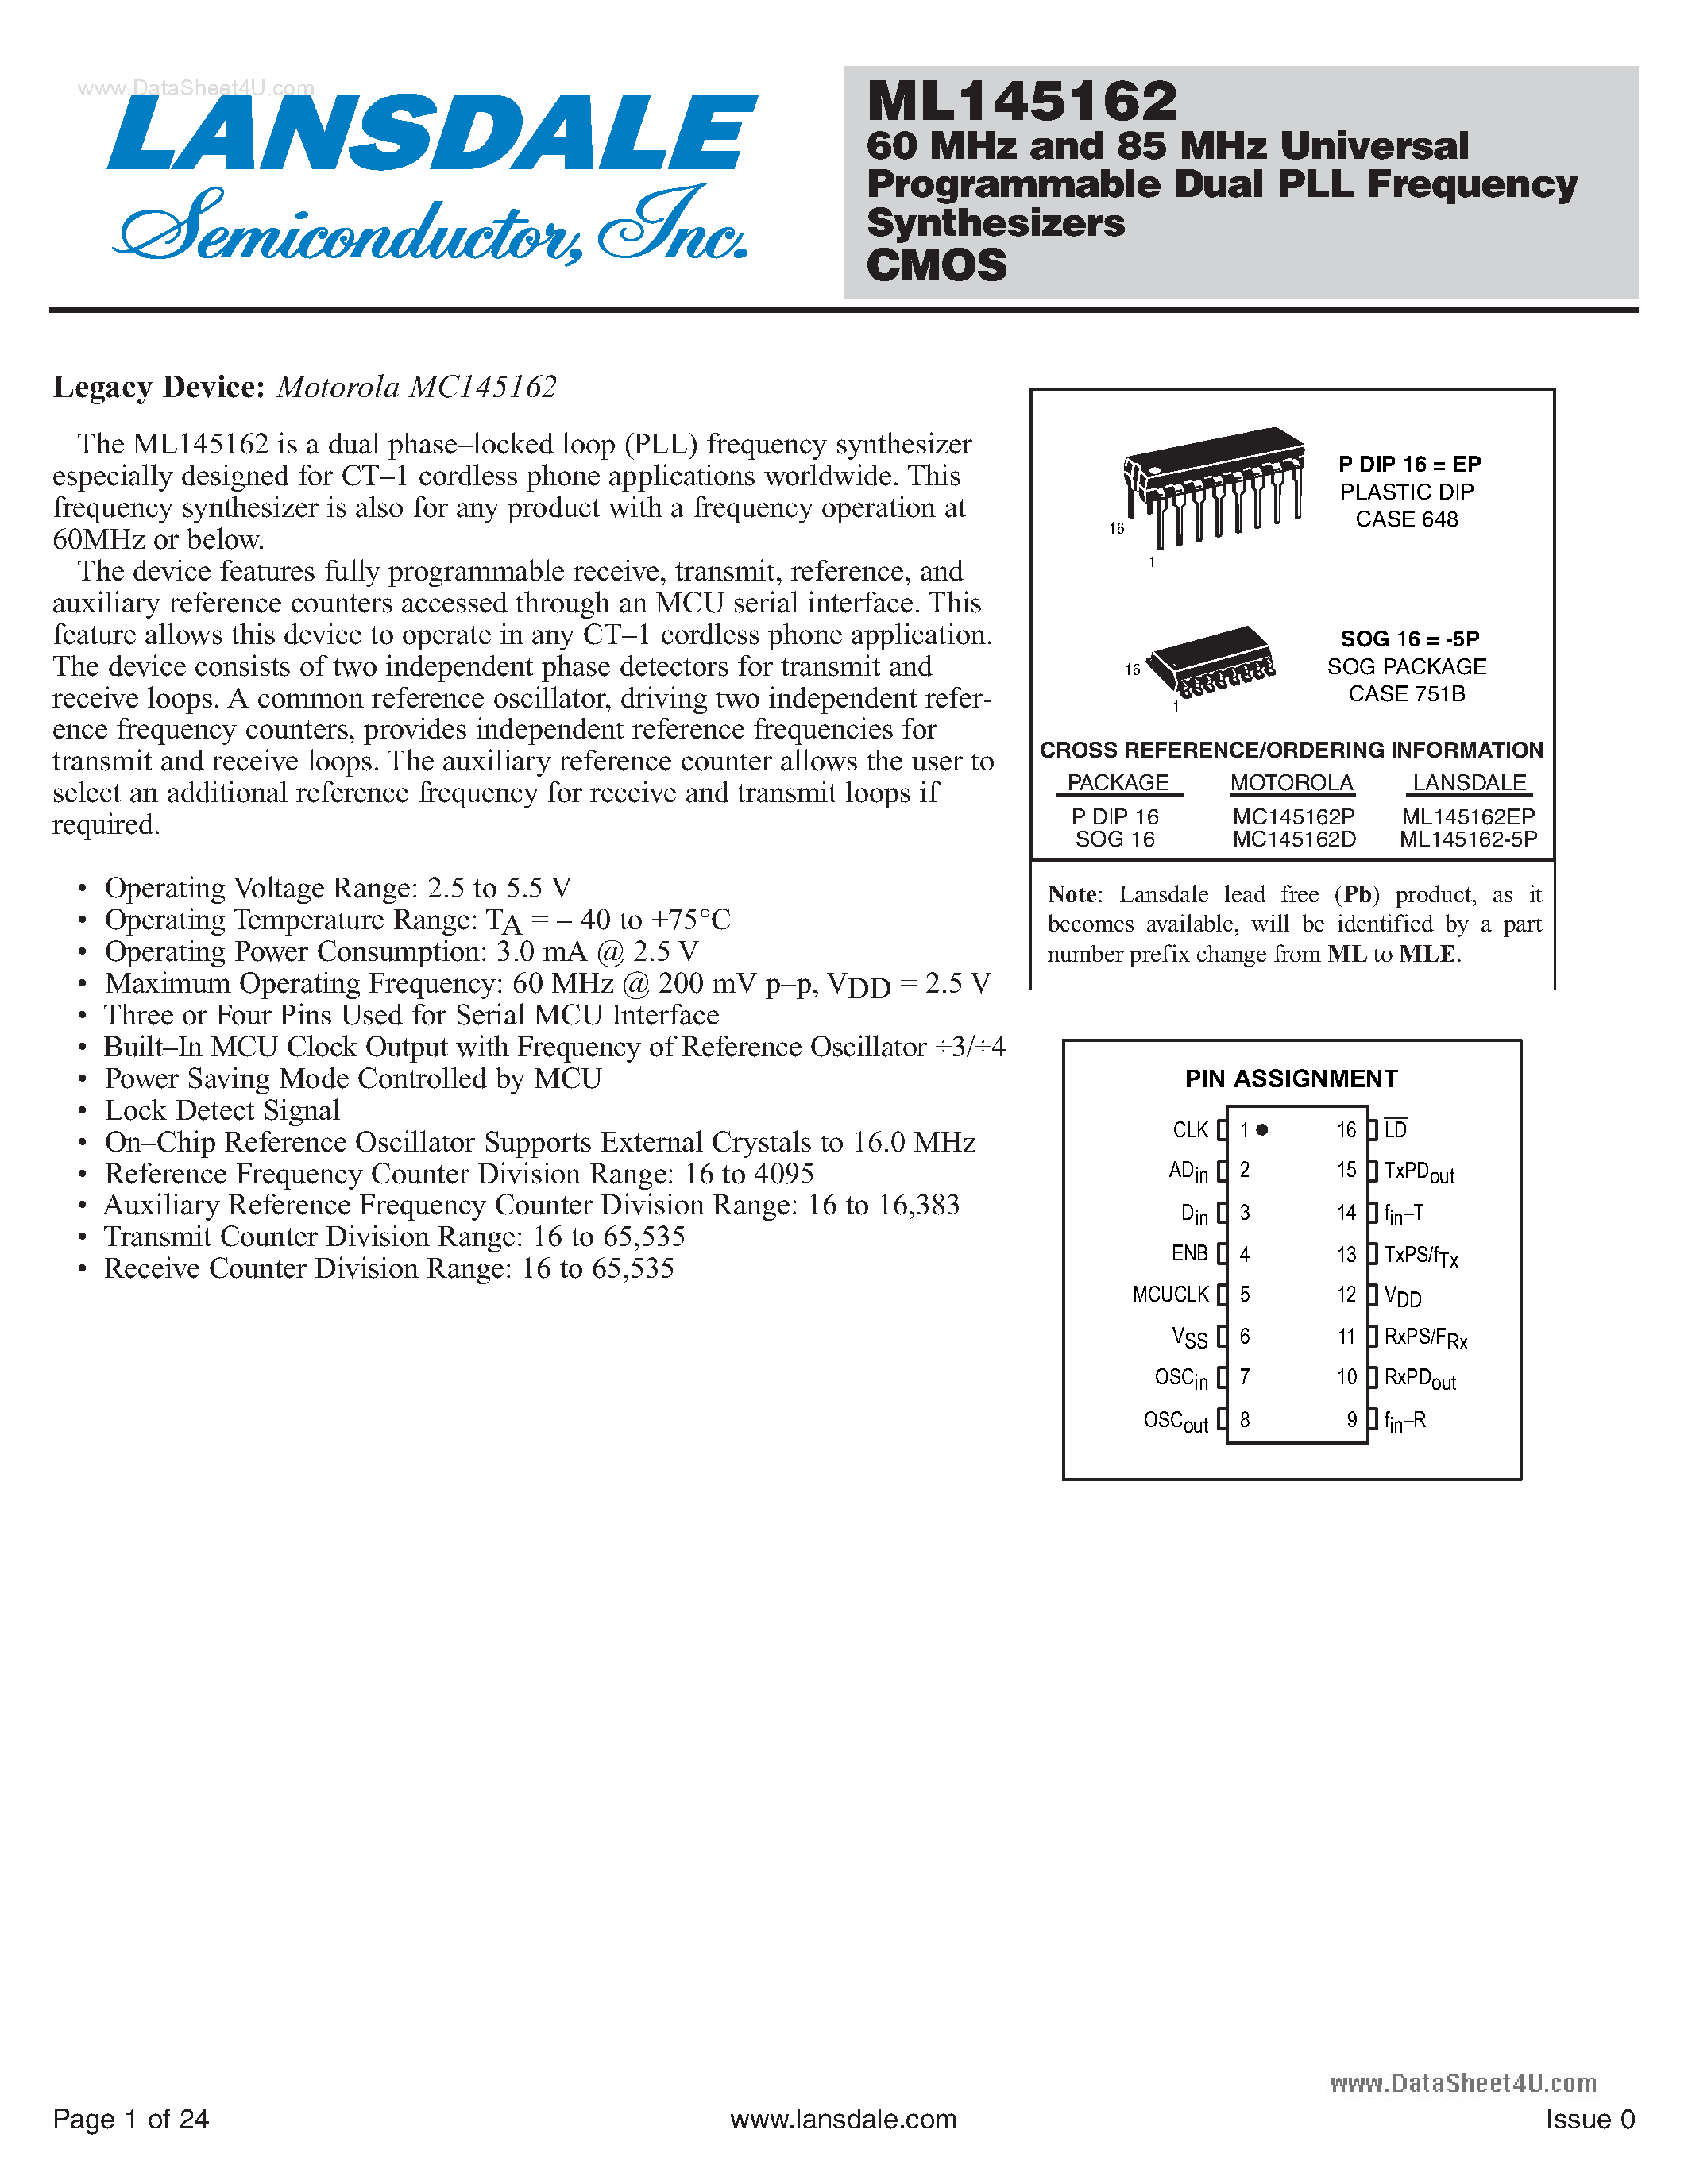 Datasheet ML145162 - 60 MHz and 85 MHz Universal Programmable Dual PLL Frequency Synthesizers CMOS page 1